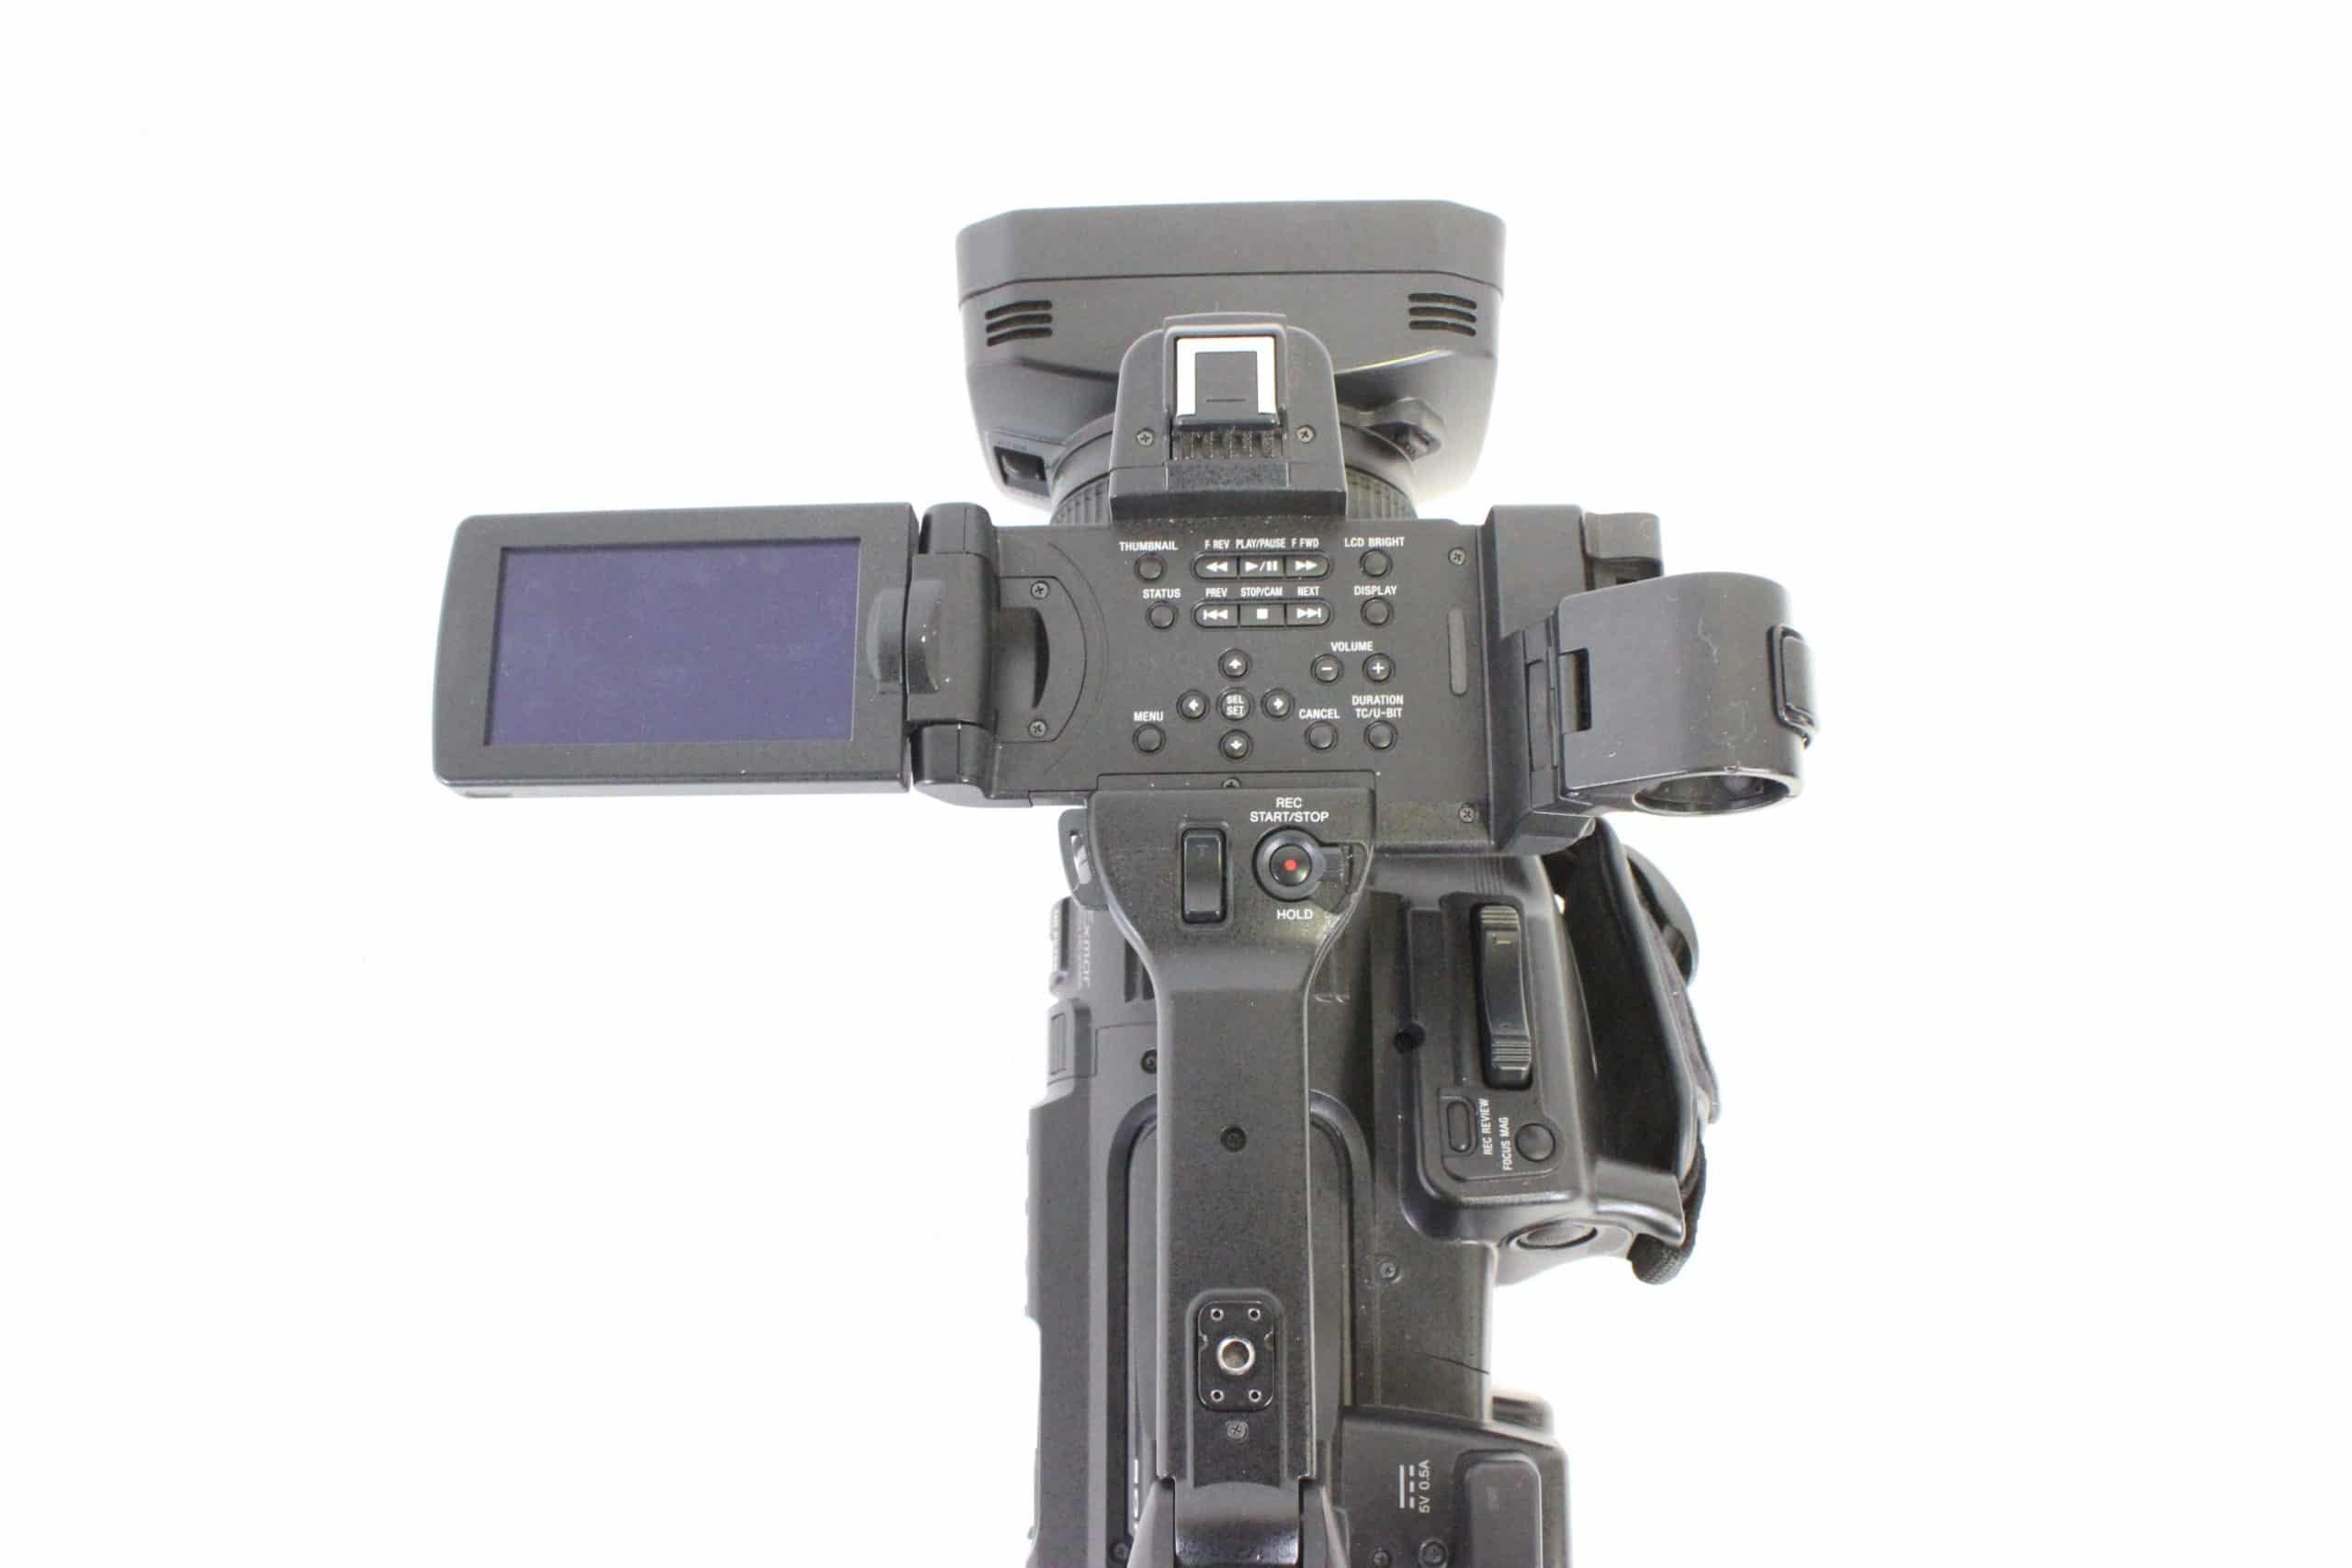 Sony PXW-X200 XDCAM Solid-State Memory Handheld Camcorder w/ 17x Optical  Zoom Lens - PSU & Accessories Included [437 Hrs] (Original Box)